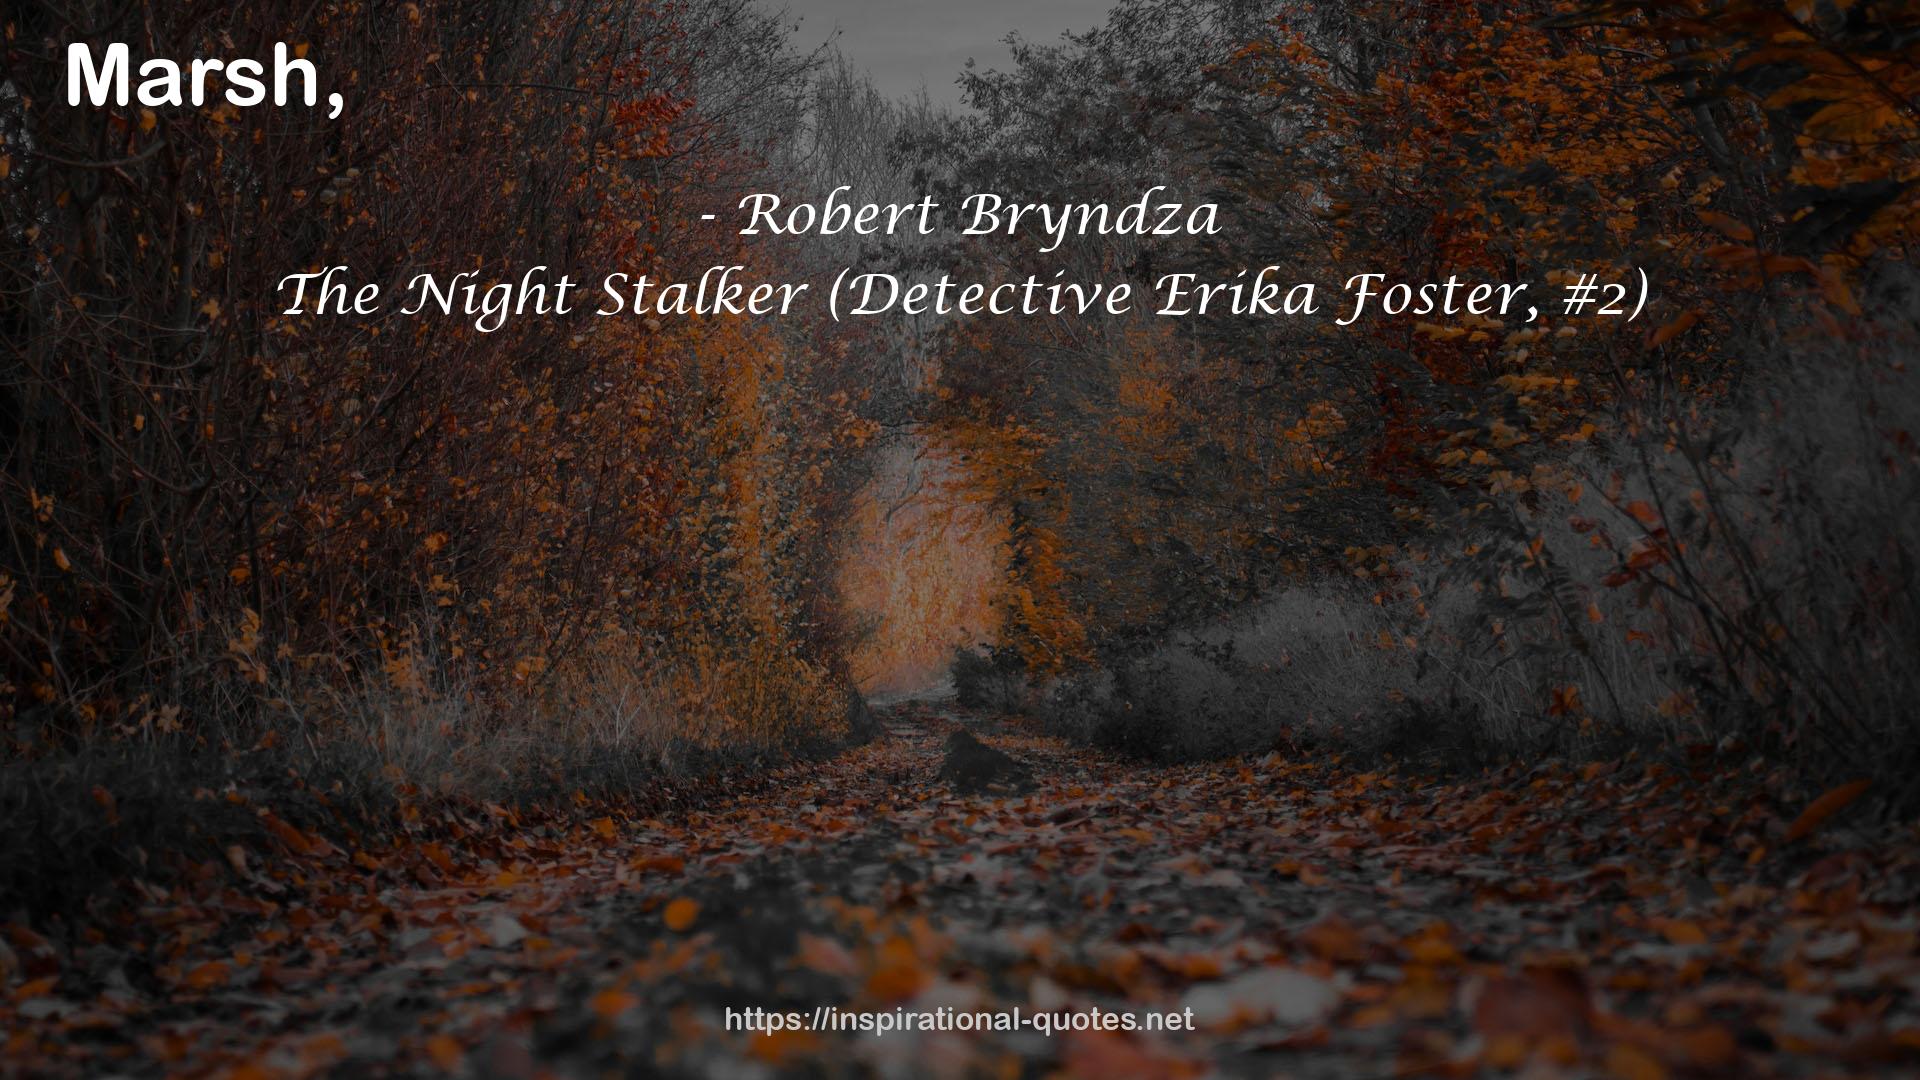 Robert Bryndza QUOTES